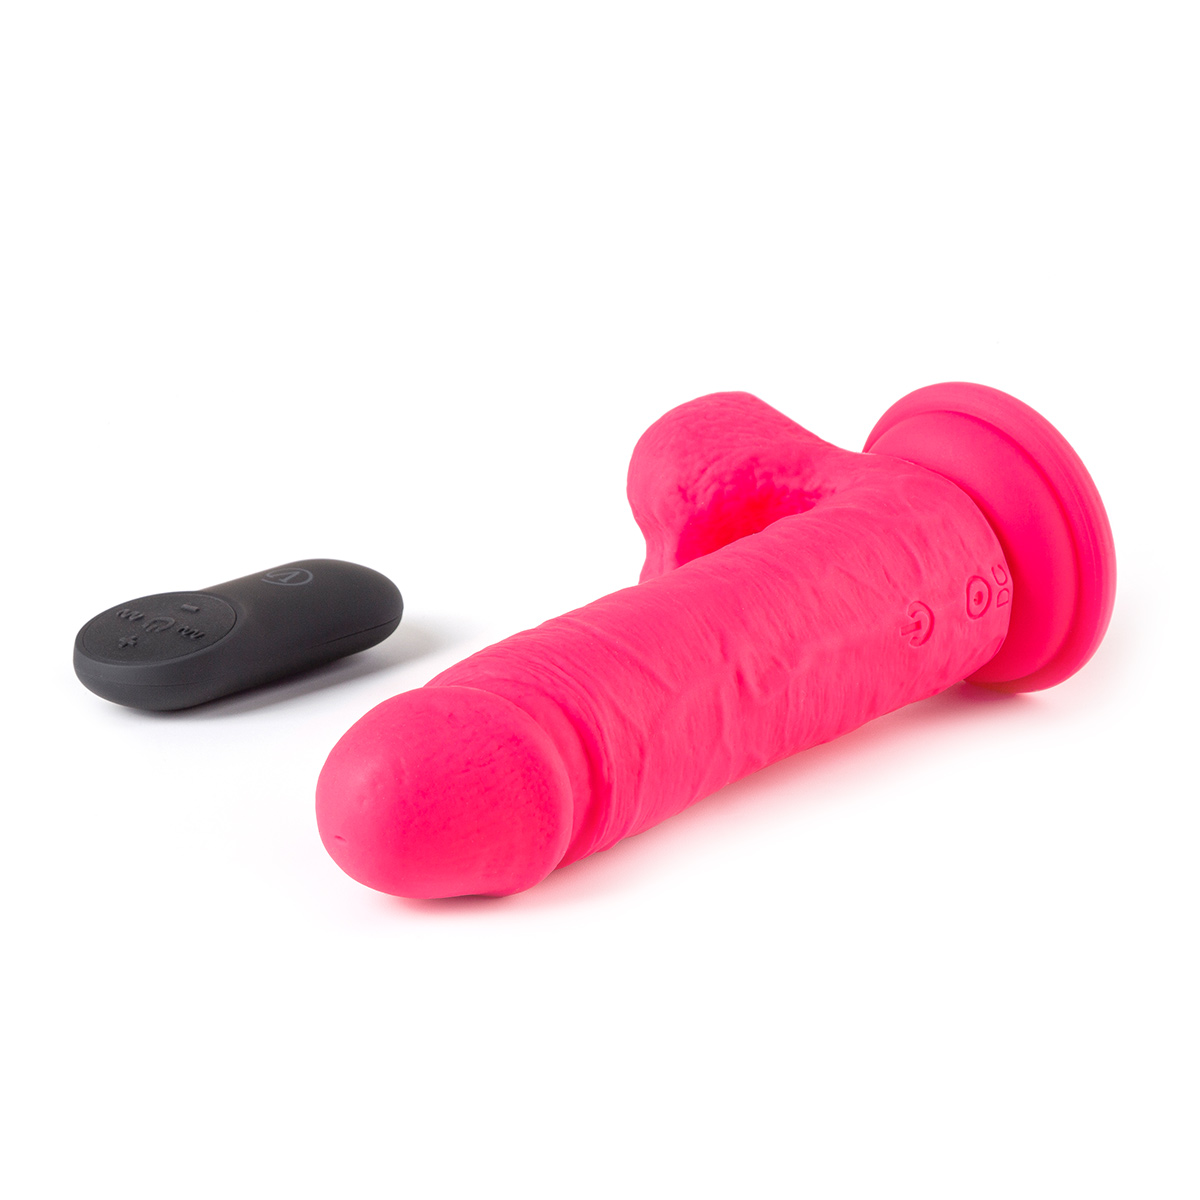 Vibrating-Realistic-with-Remote-R12-Pink-OPR-3090096-1